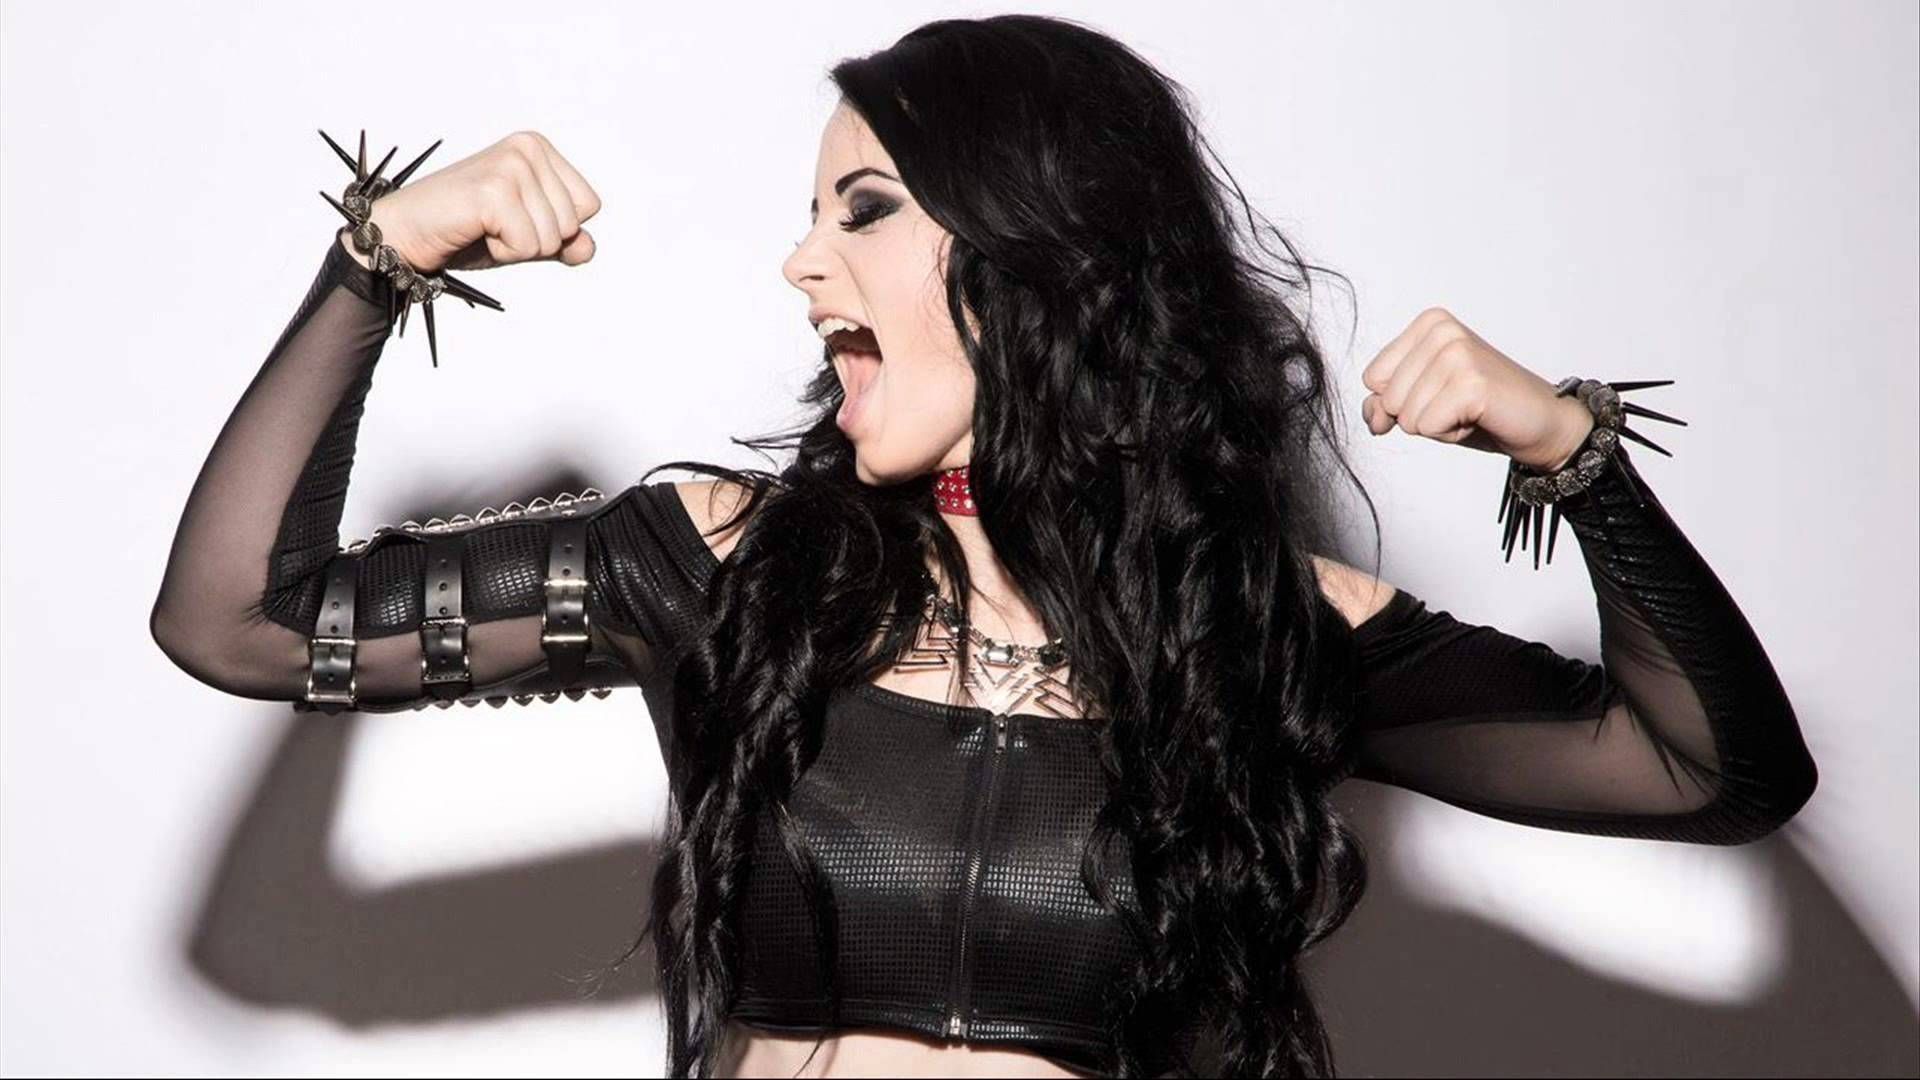 After 10 years in the company, Paige left WWE last month.